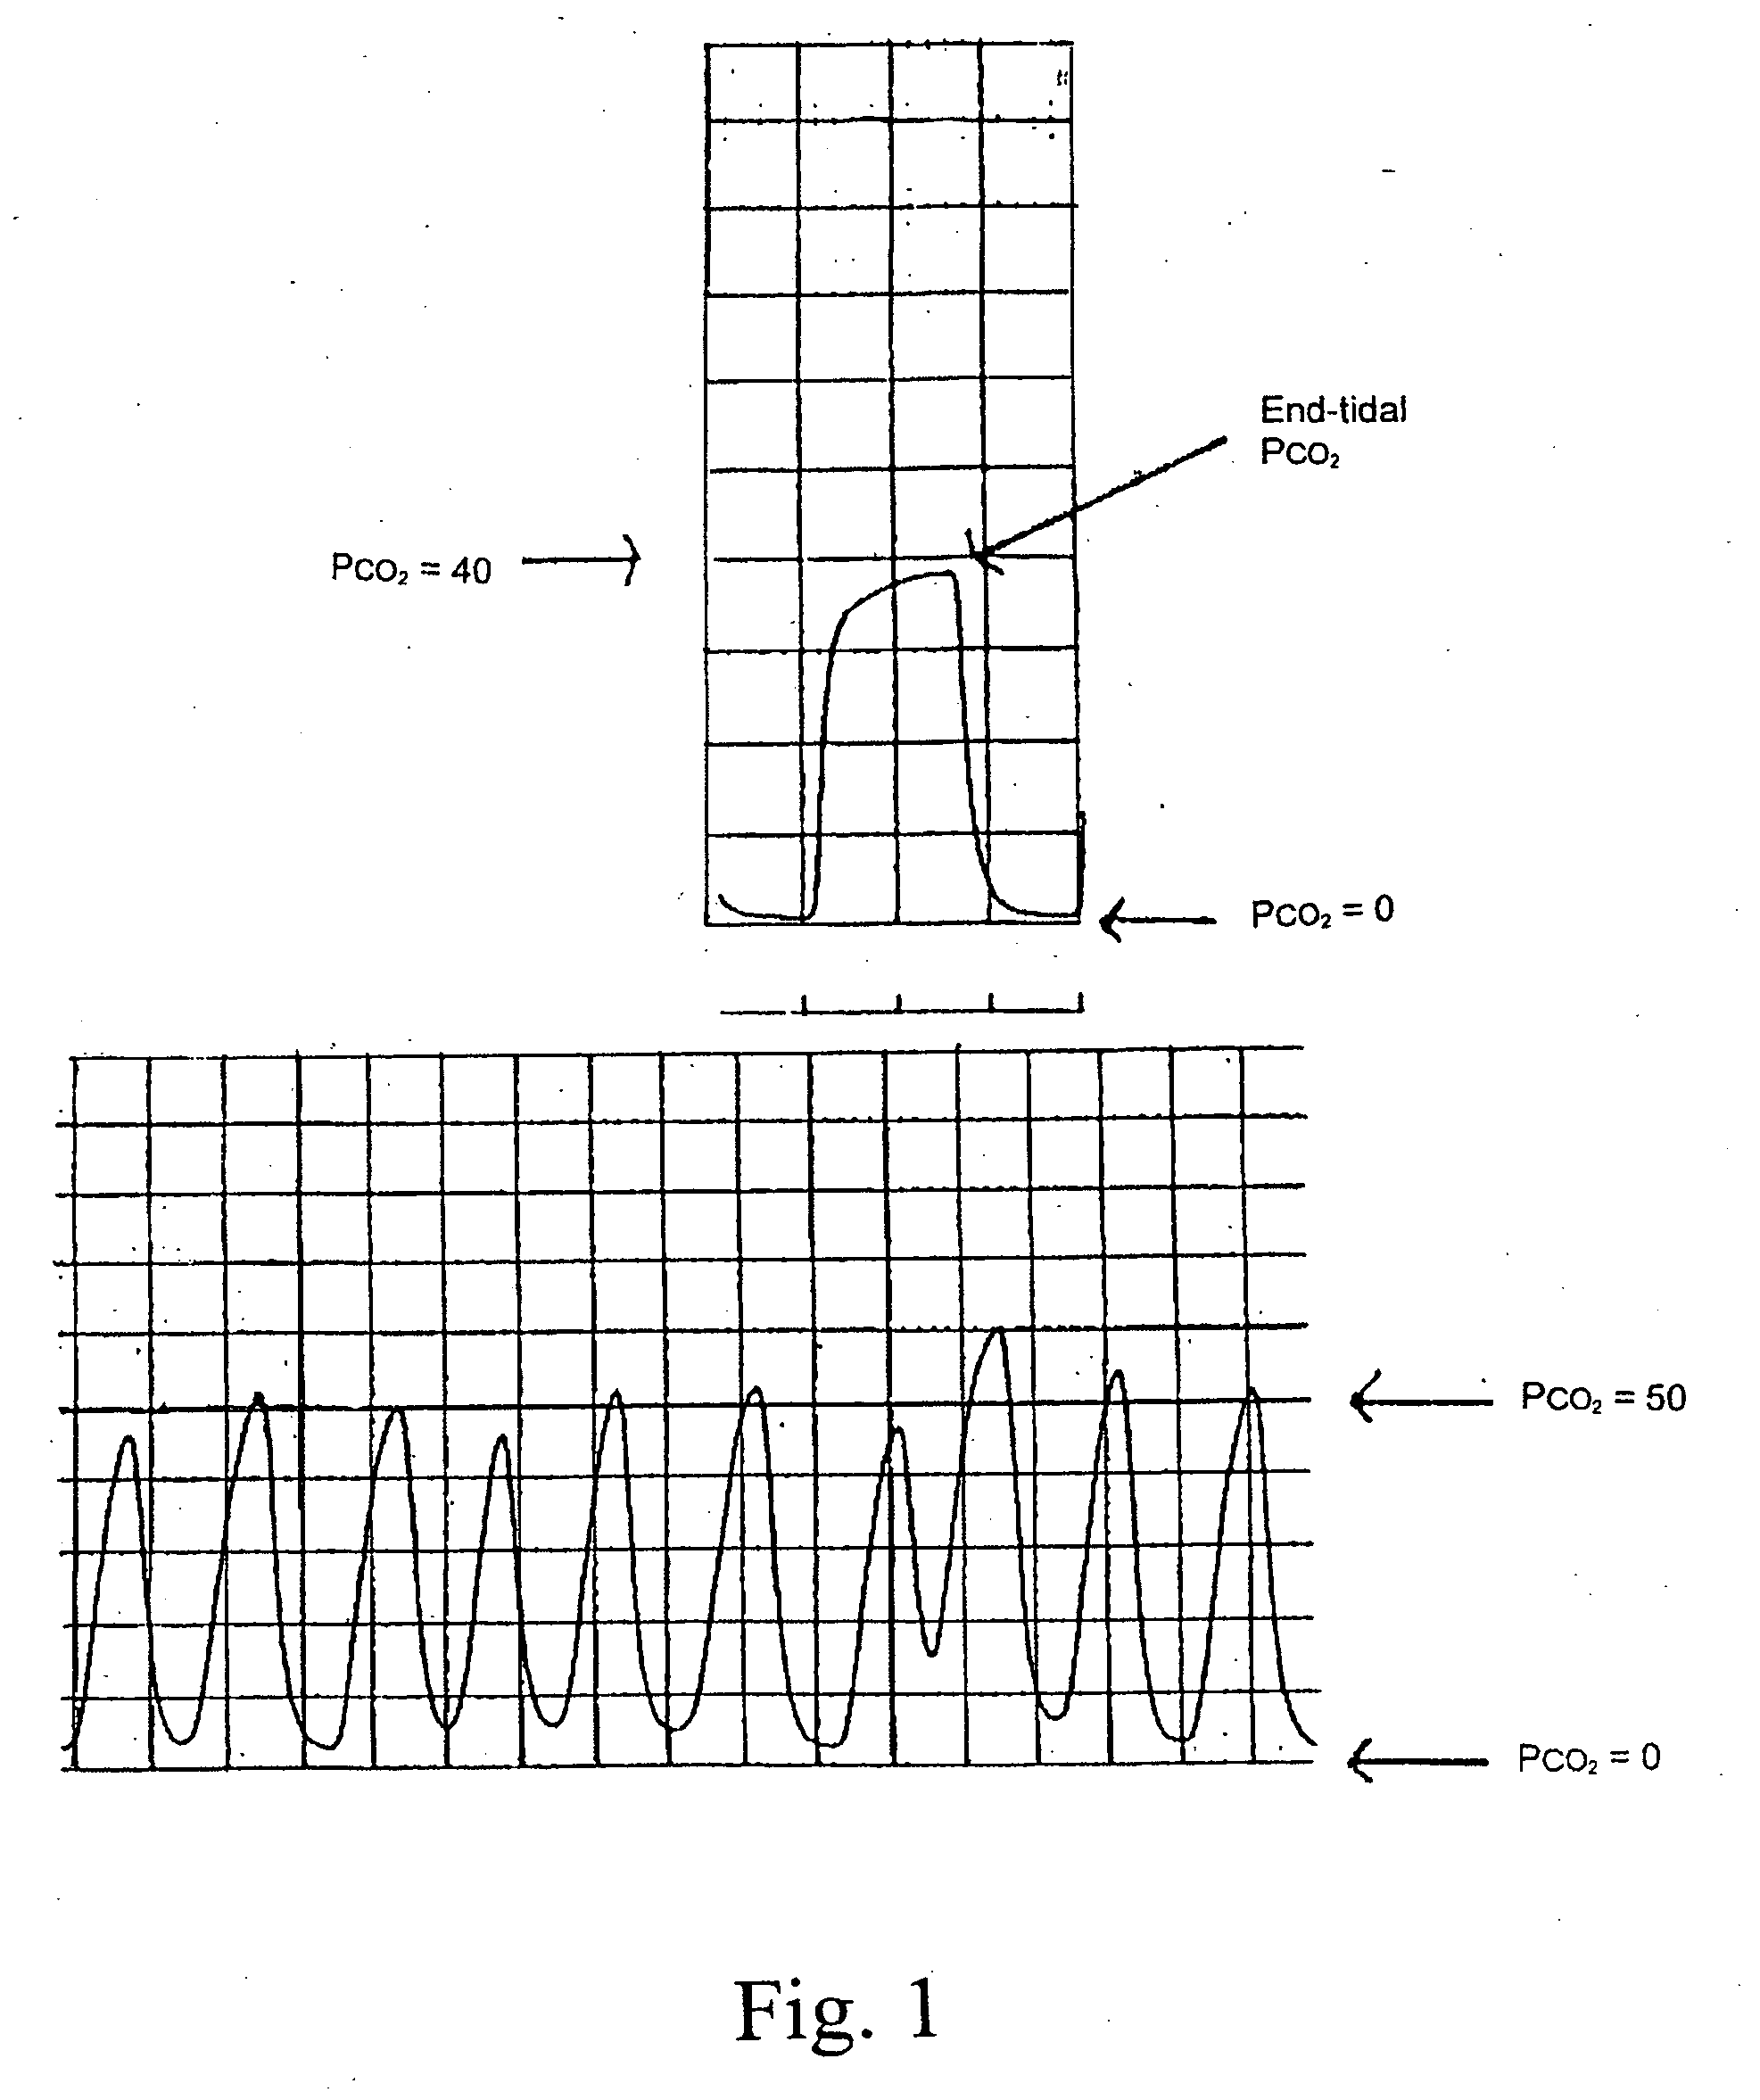 Marker detection method and apparatus to monitor drug compliance